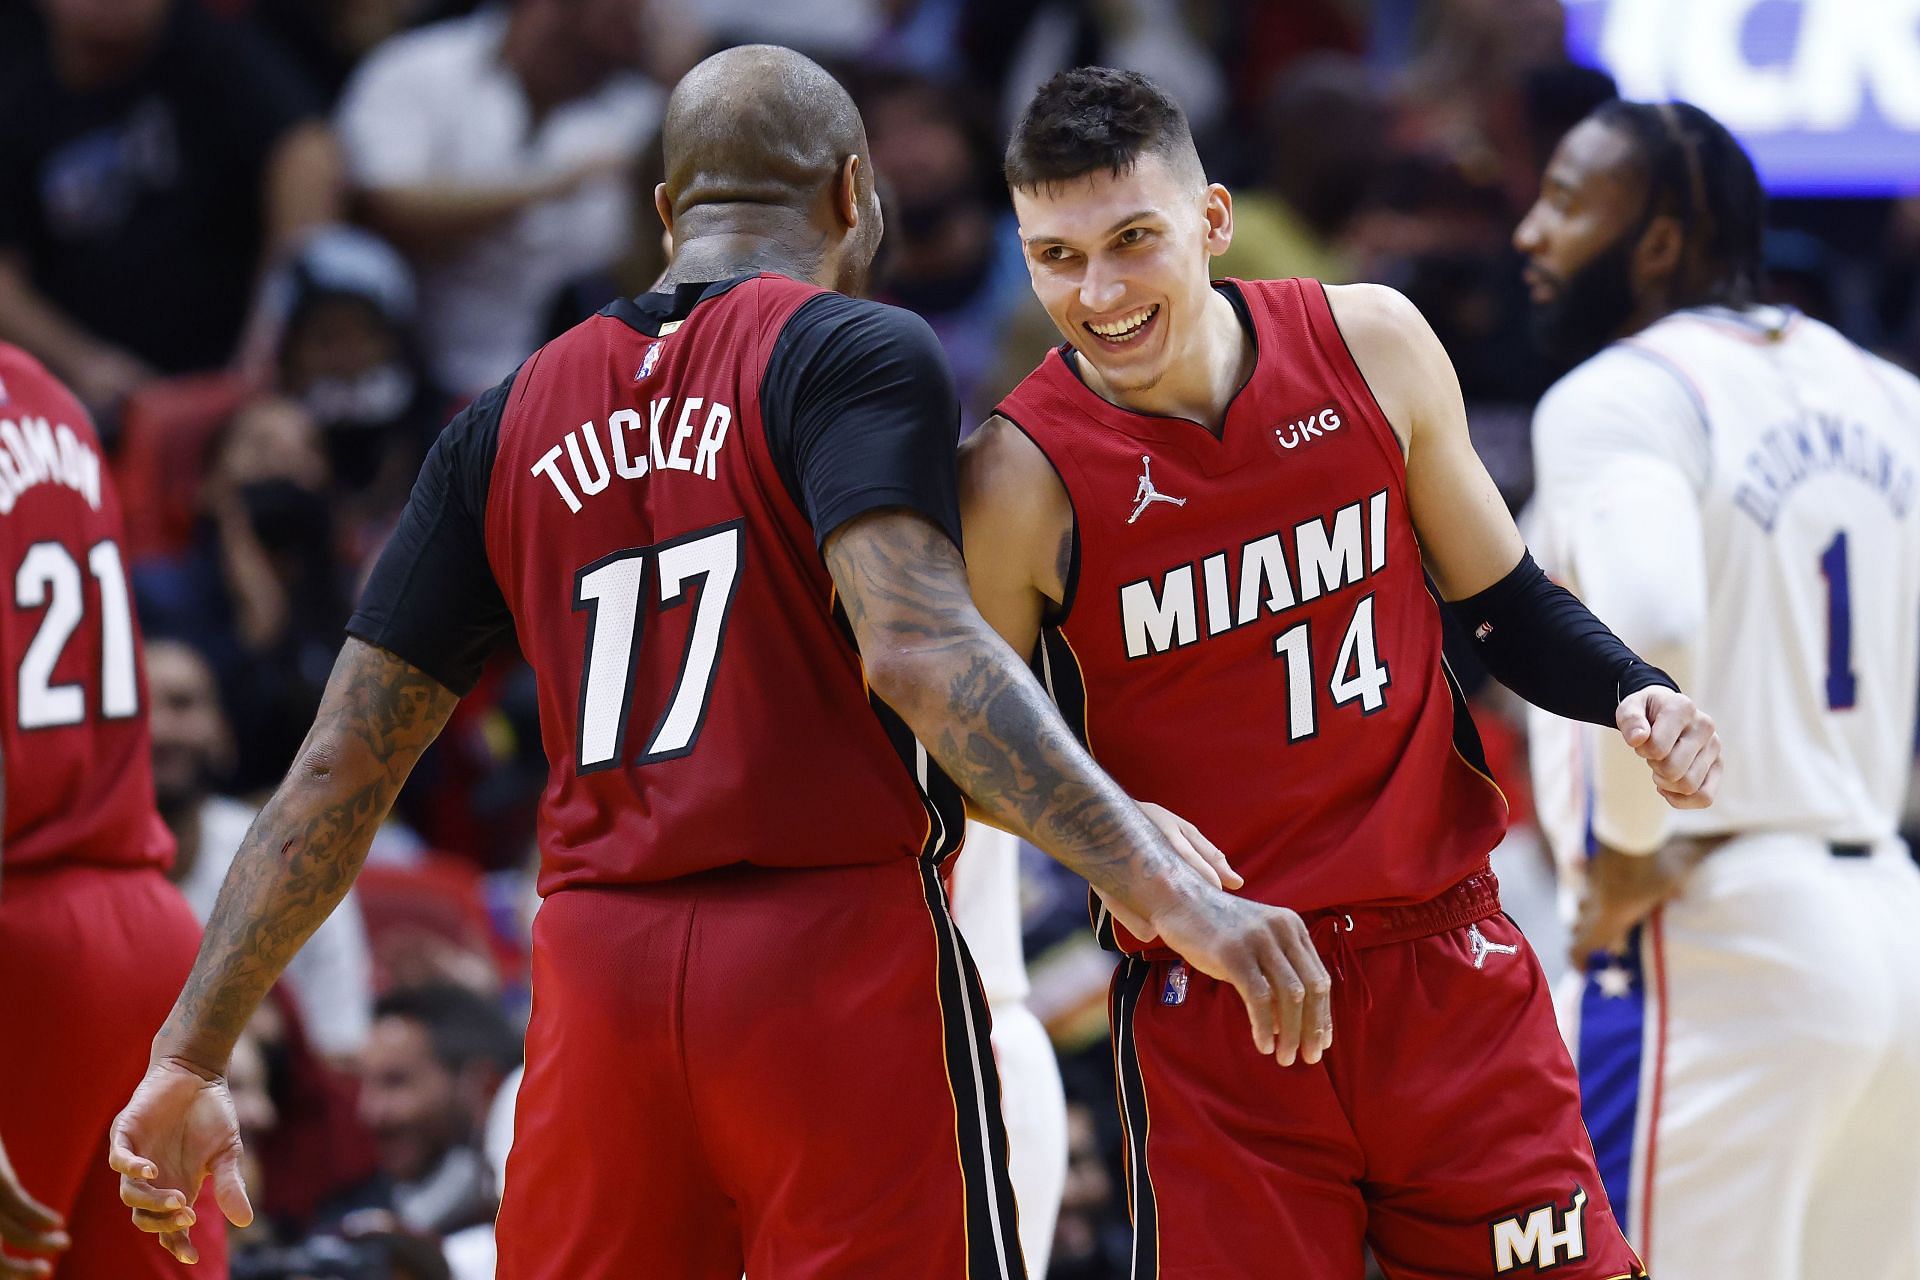 Miami Heat sharpshooter Tyler Herro continues to be a favorite for Sixth Man of the Year